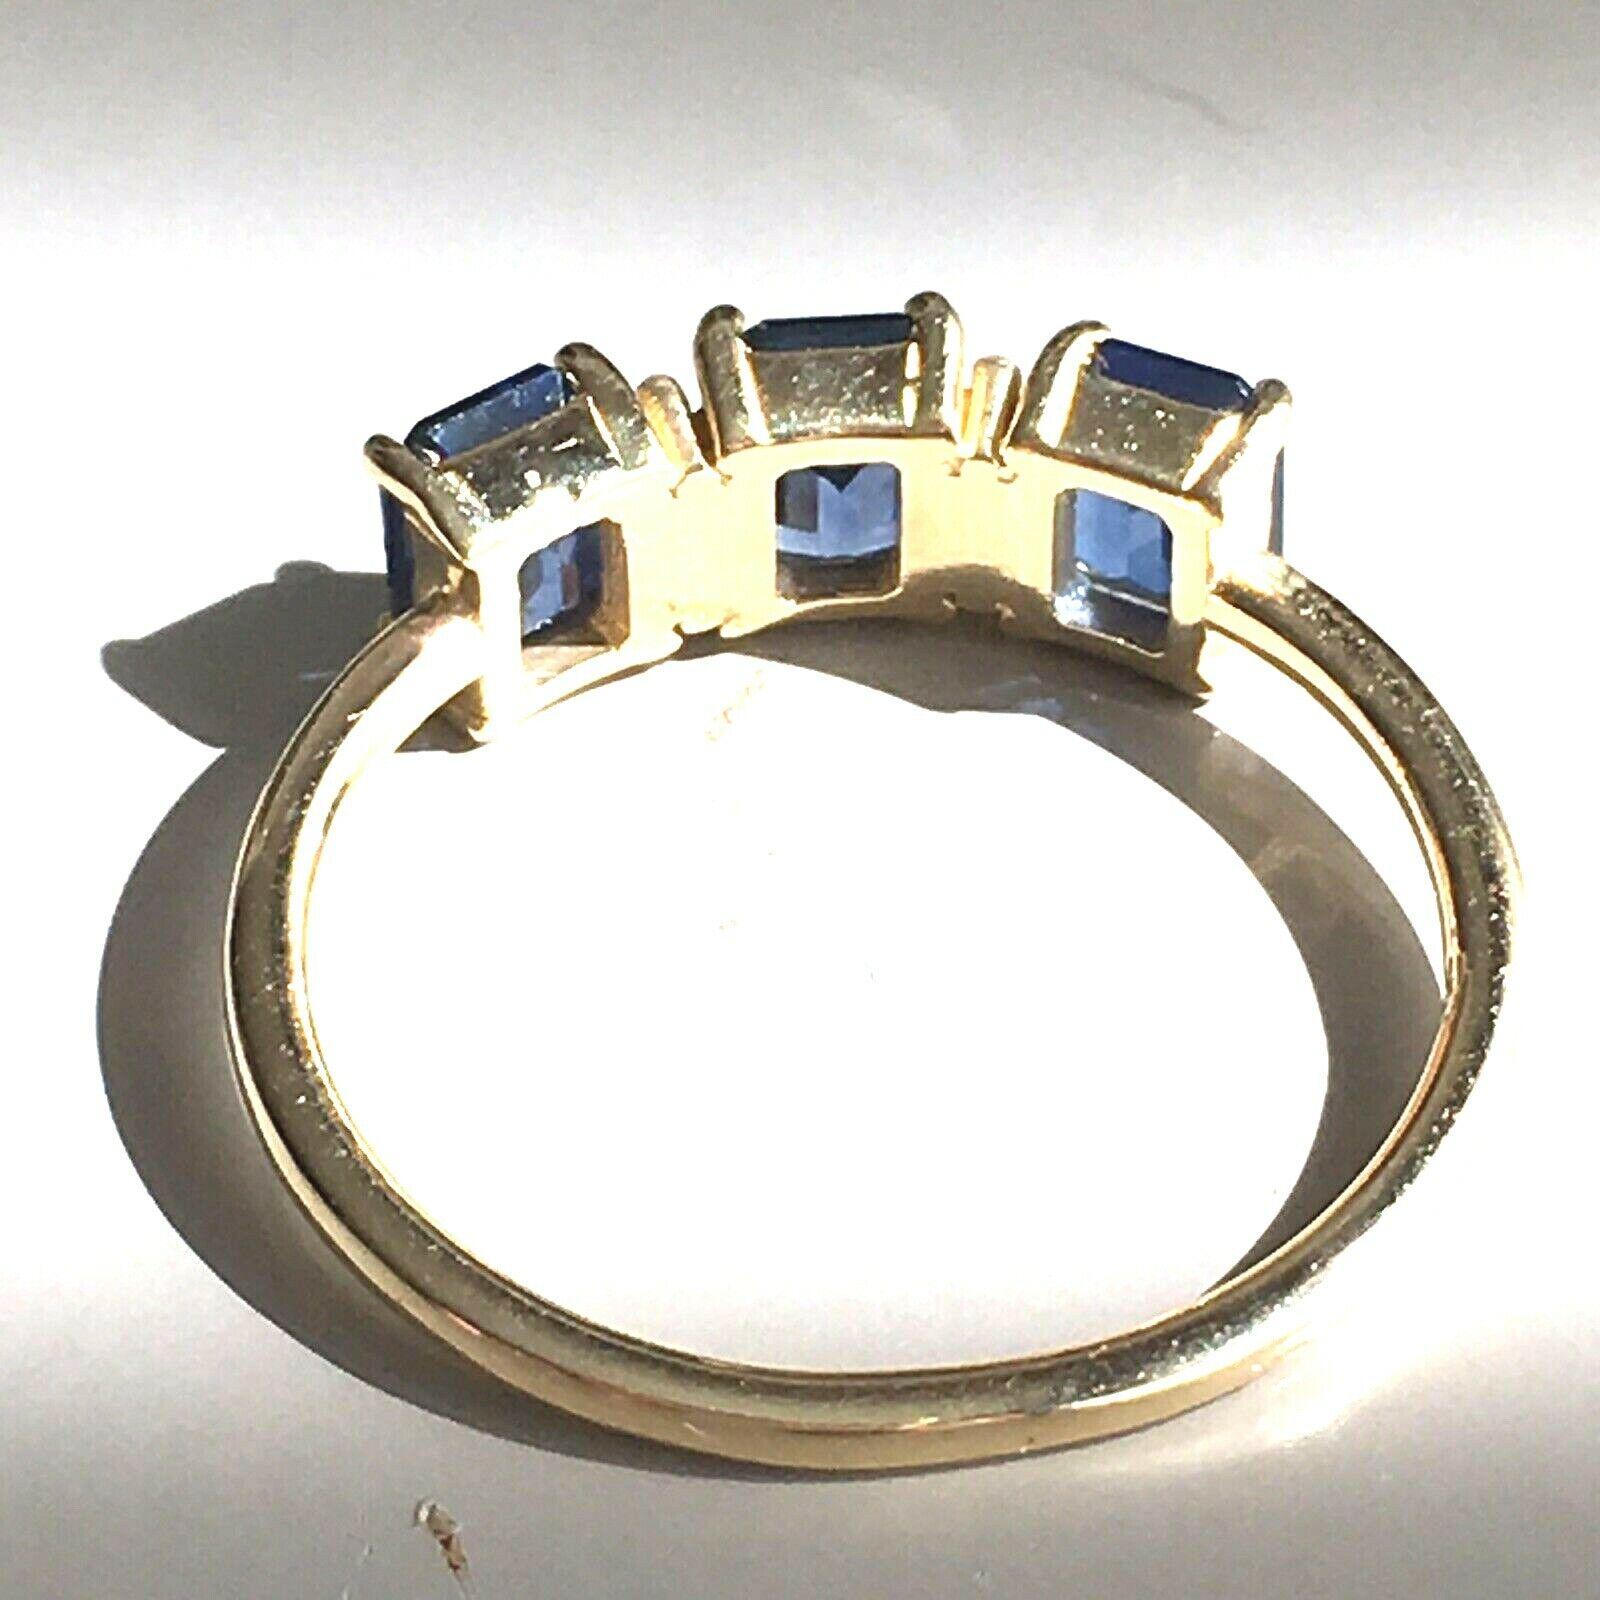 Trio Emerald Cut Natural Blue Sapphire & Diamond ring
Three natural Blue Sapphire 4 mm by 5 mm Emerald cut total weight of 1.3 Carat, 4 full cut diamonds with Total Diamond Weight of .04 Carat of approximately color and clarity G-H VS1, weighting 2